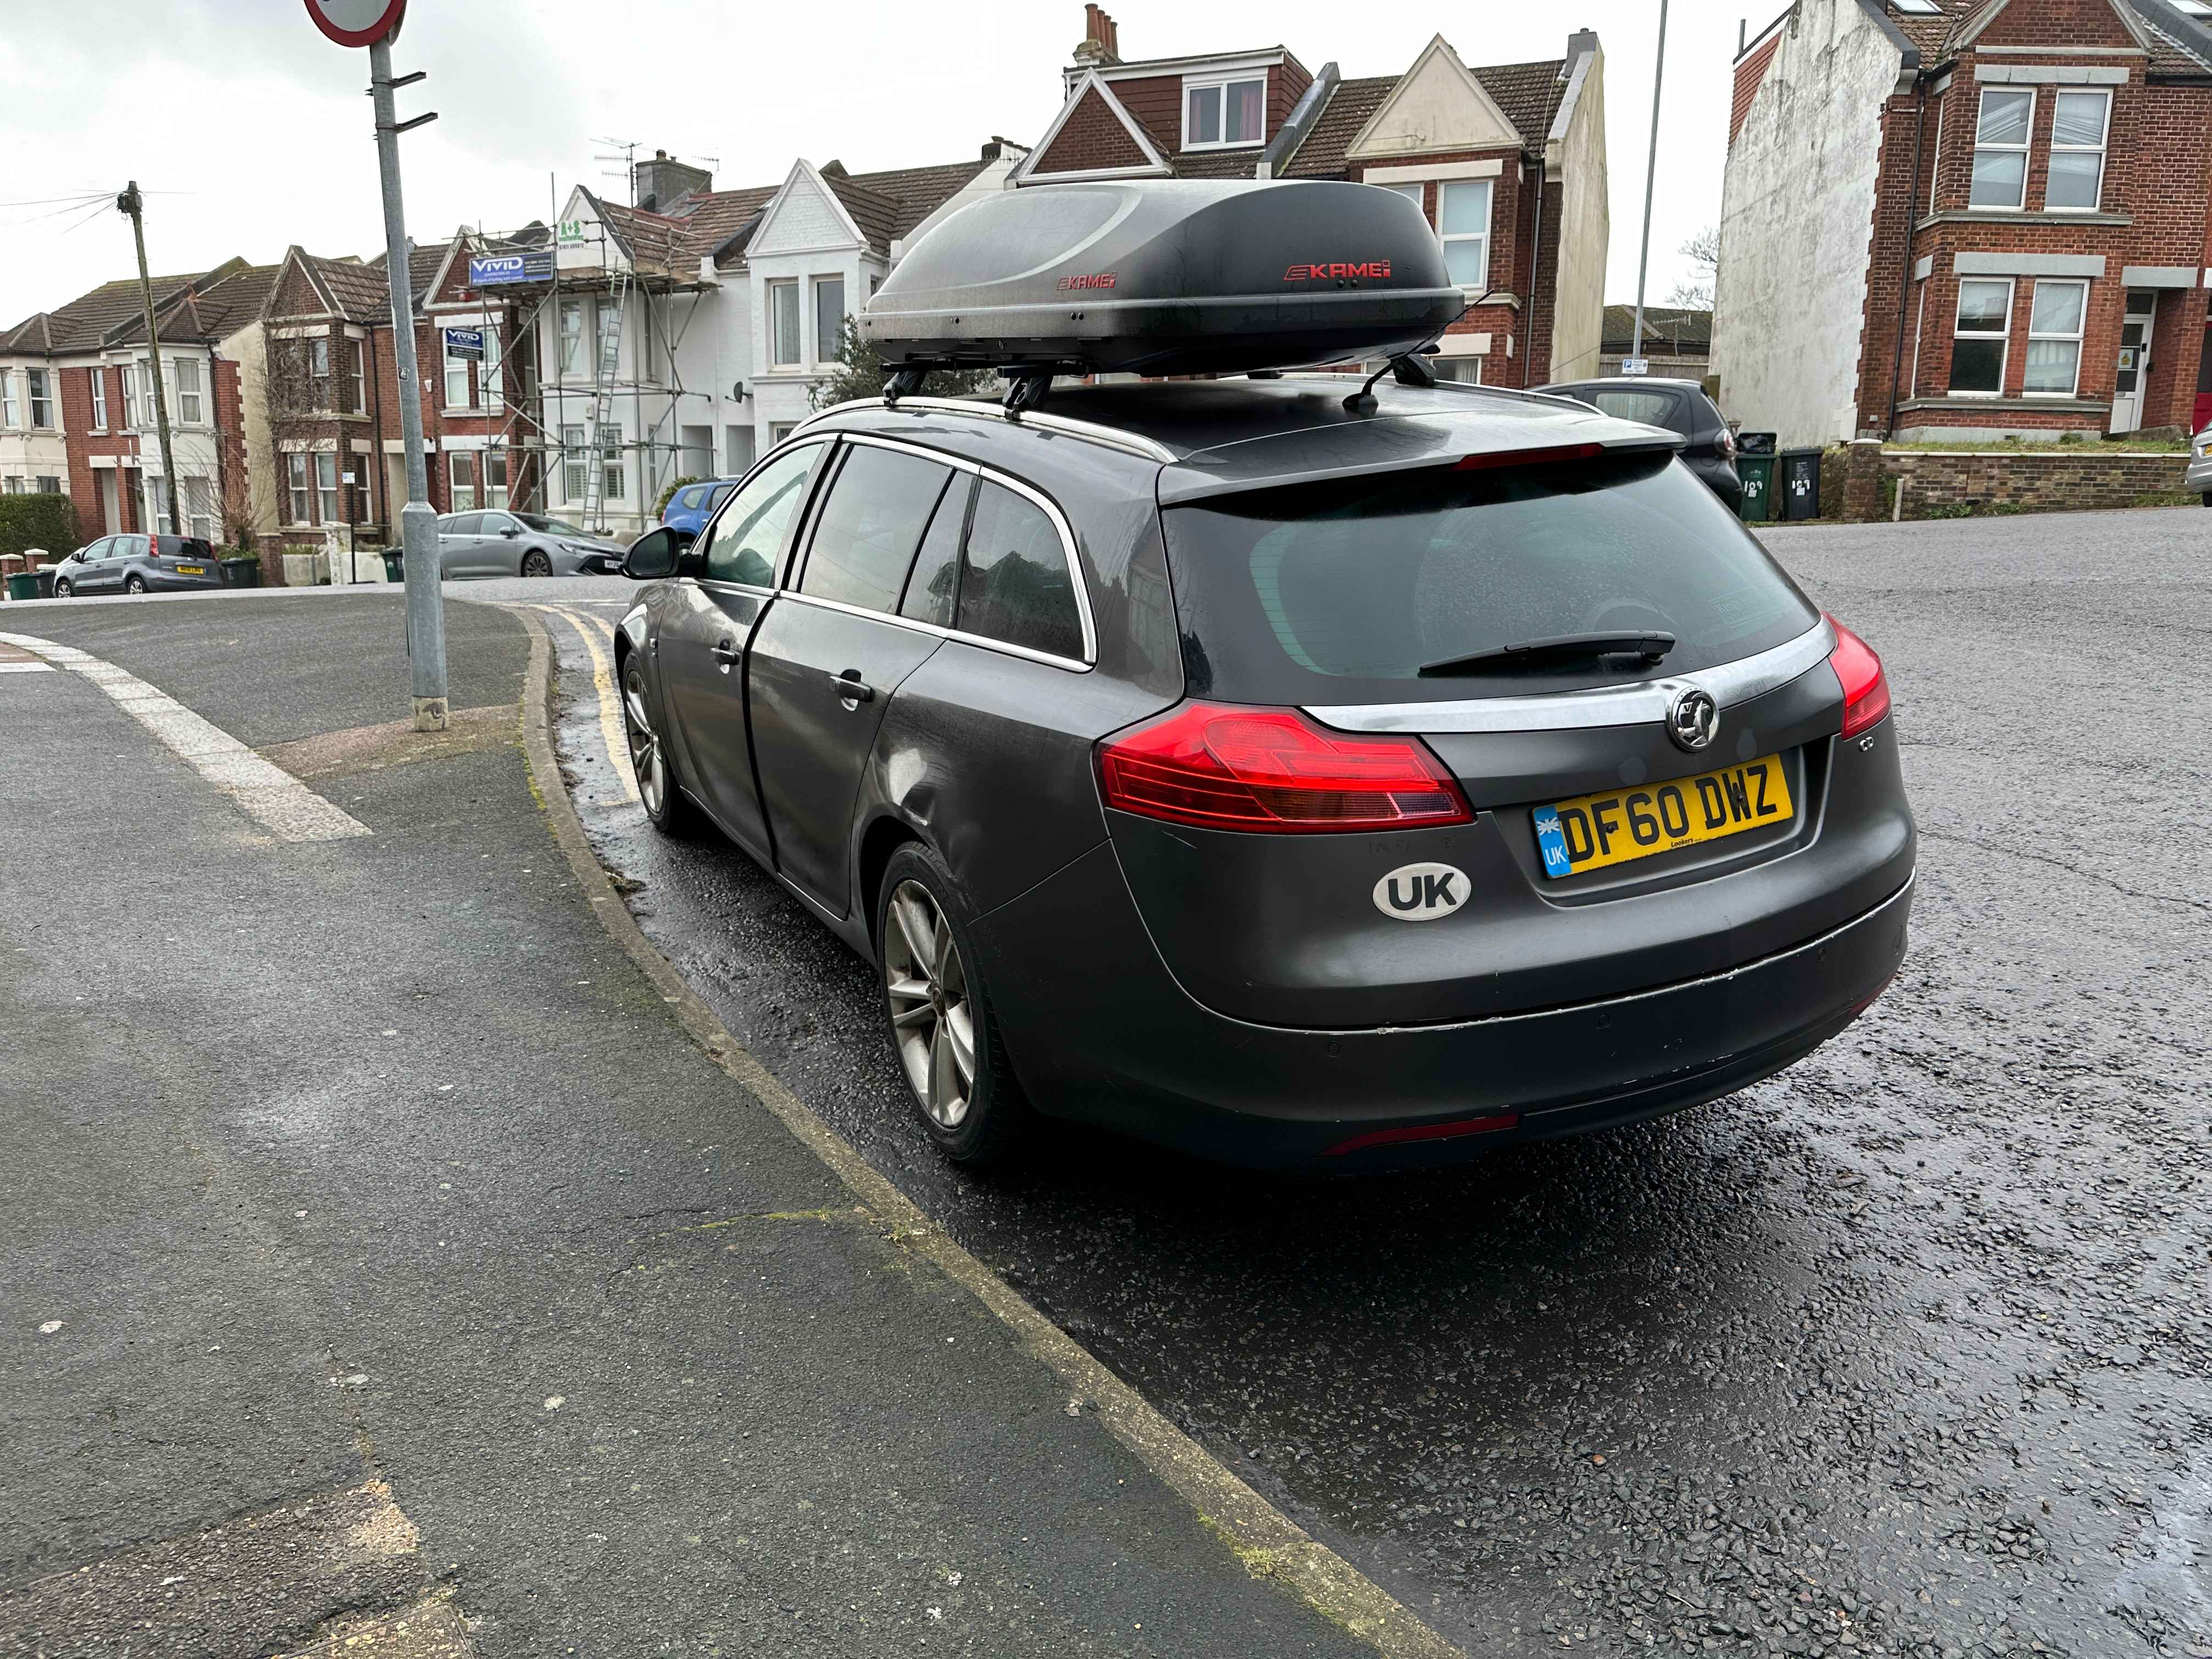 Photograph of DF60 DWZ - a Grey Vauxhall Insignia parked in Hollingdean by a non-resident. The ninth of nine photographs supplied by the residents of Hollingdean.